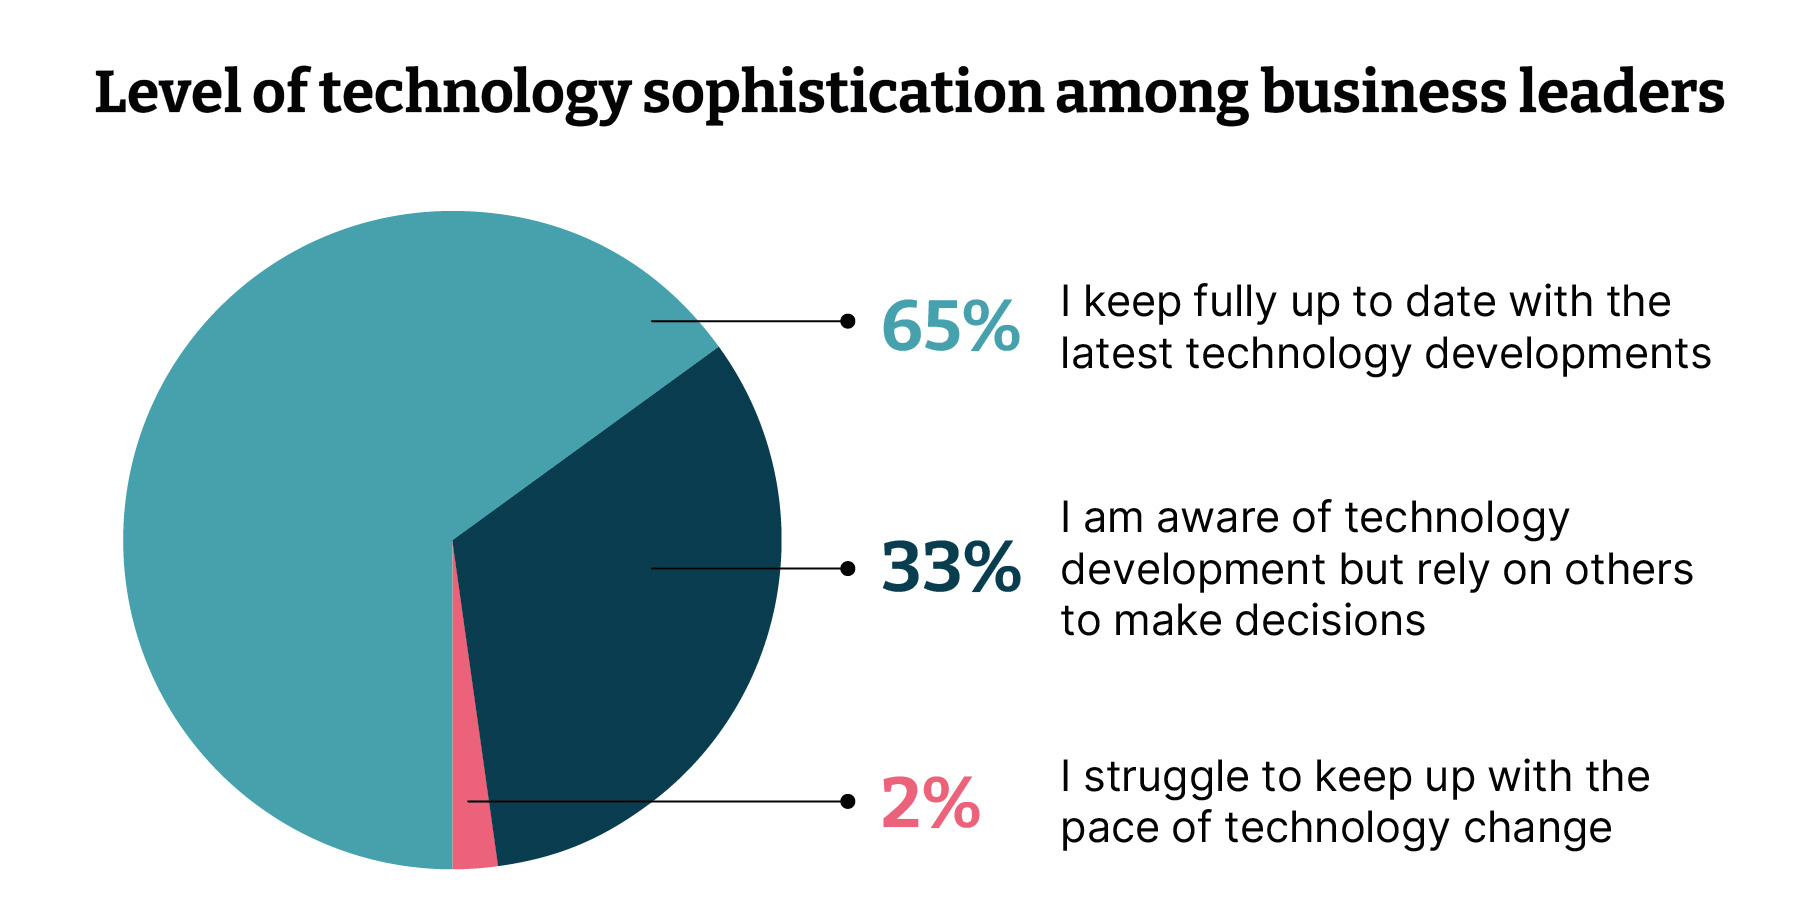 Level of technology sophistication among business leaders